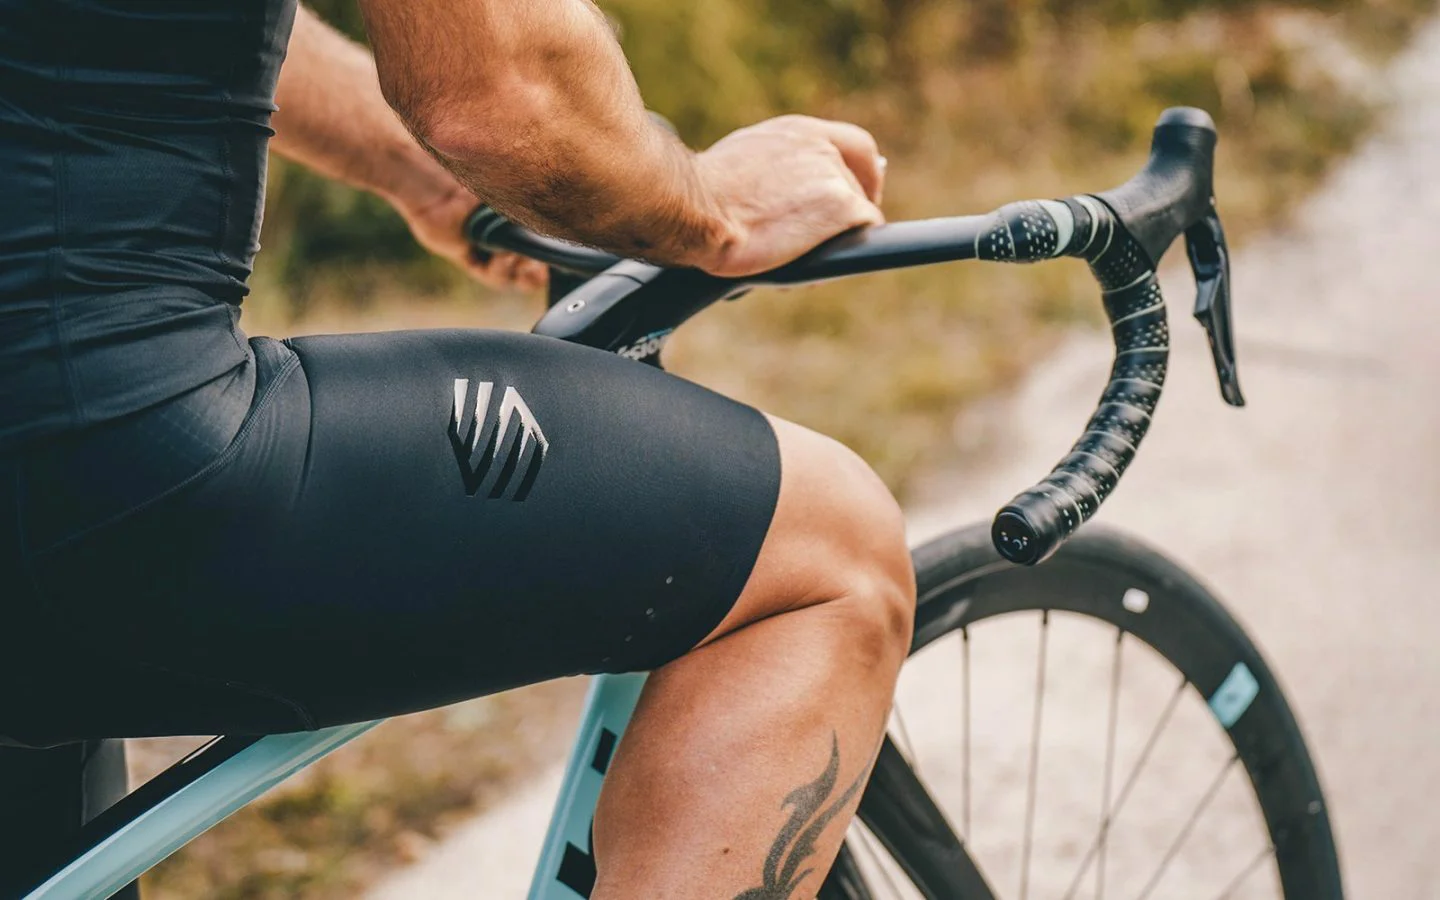 Bib Shorts Buying Guide: Everything you need to know - Probikekit